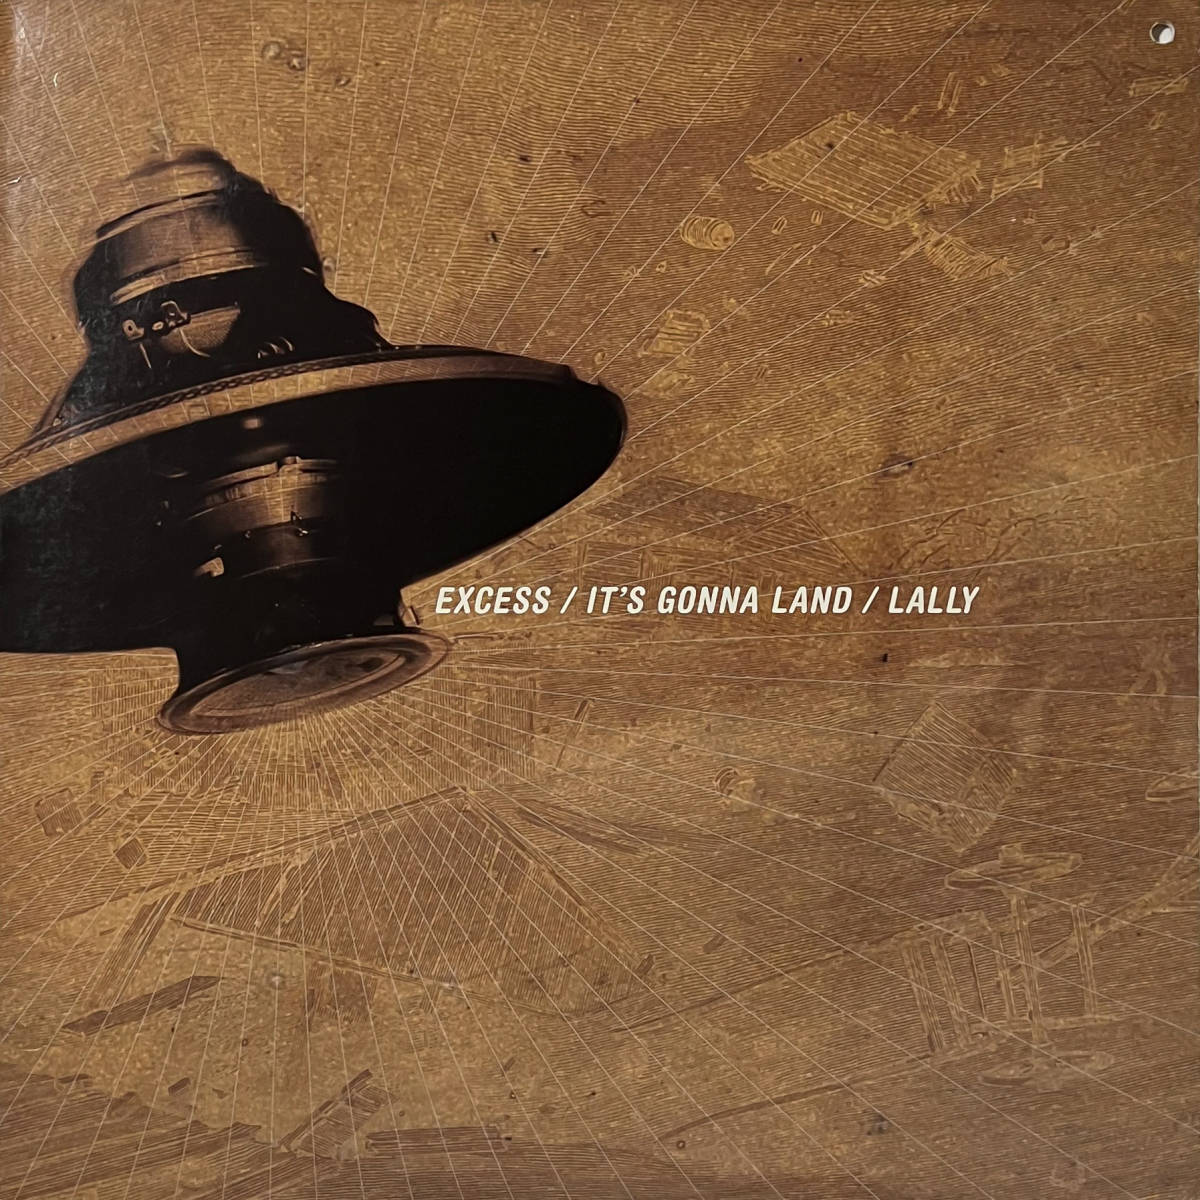  DJ Excess, Toadstyle, Mike Boo - It's Gonna Land / Lally アナログレコード 12インチ バトルブレイクス ned hoddings-